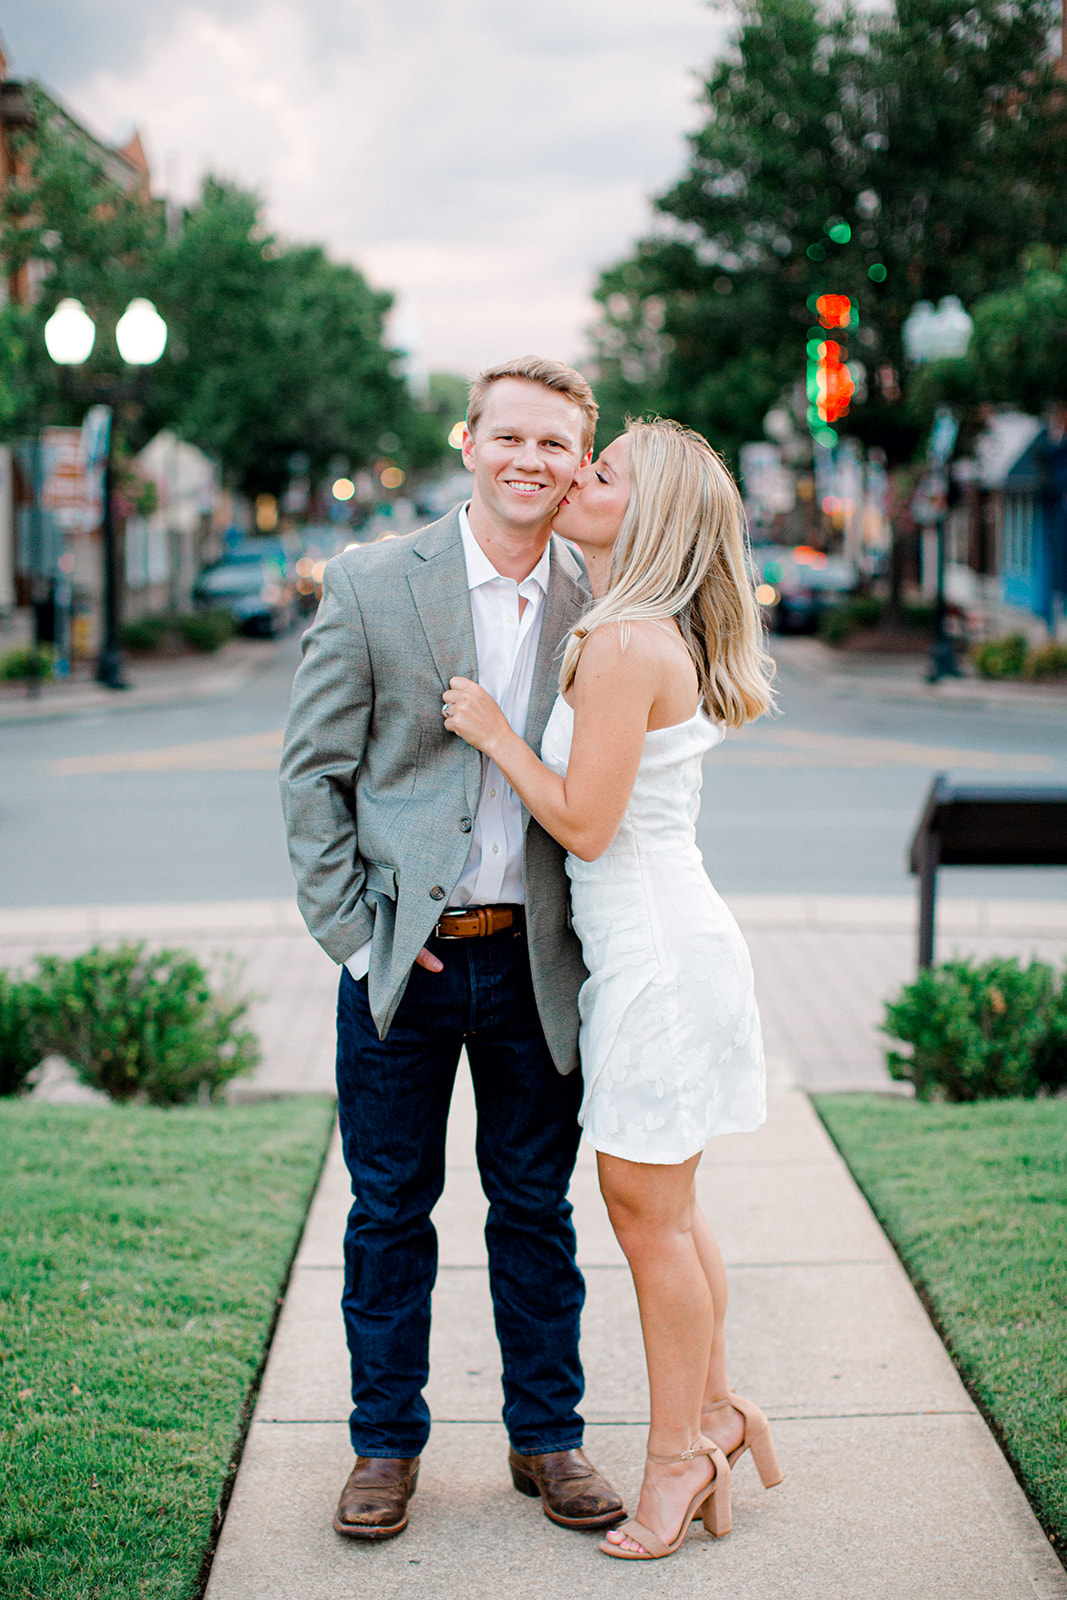 Downtown Franklin Tennessee engagement session by Ashton Brooke Photography featured on Nashville Bride Guide